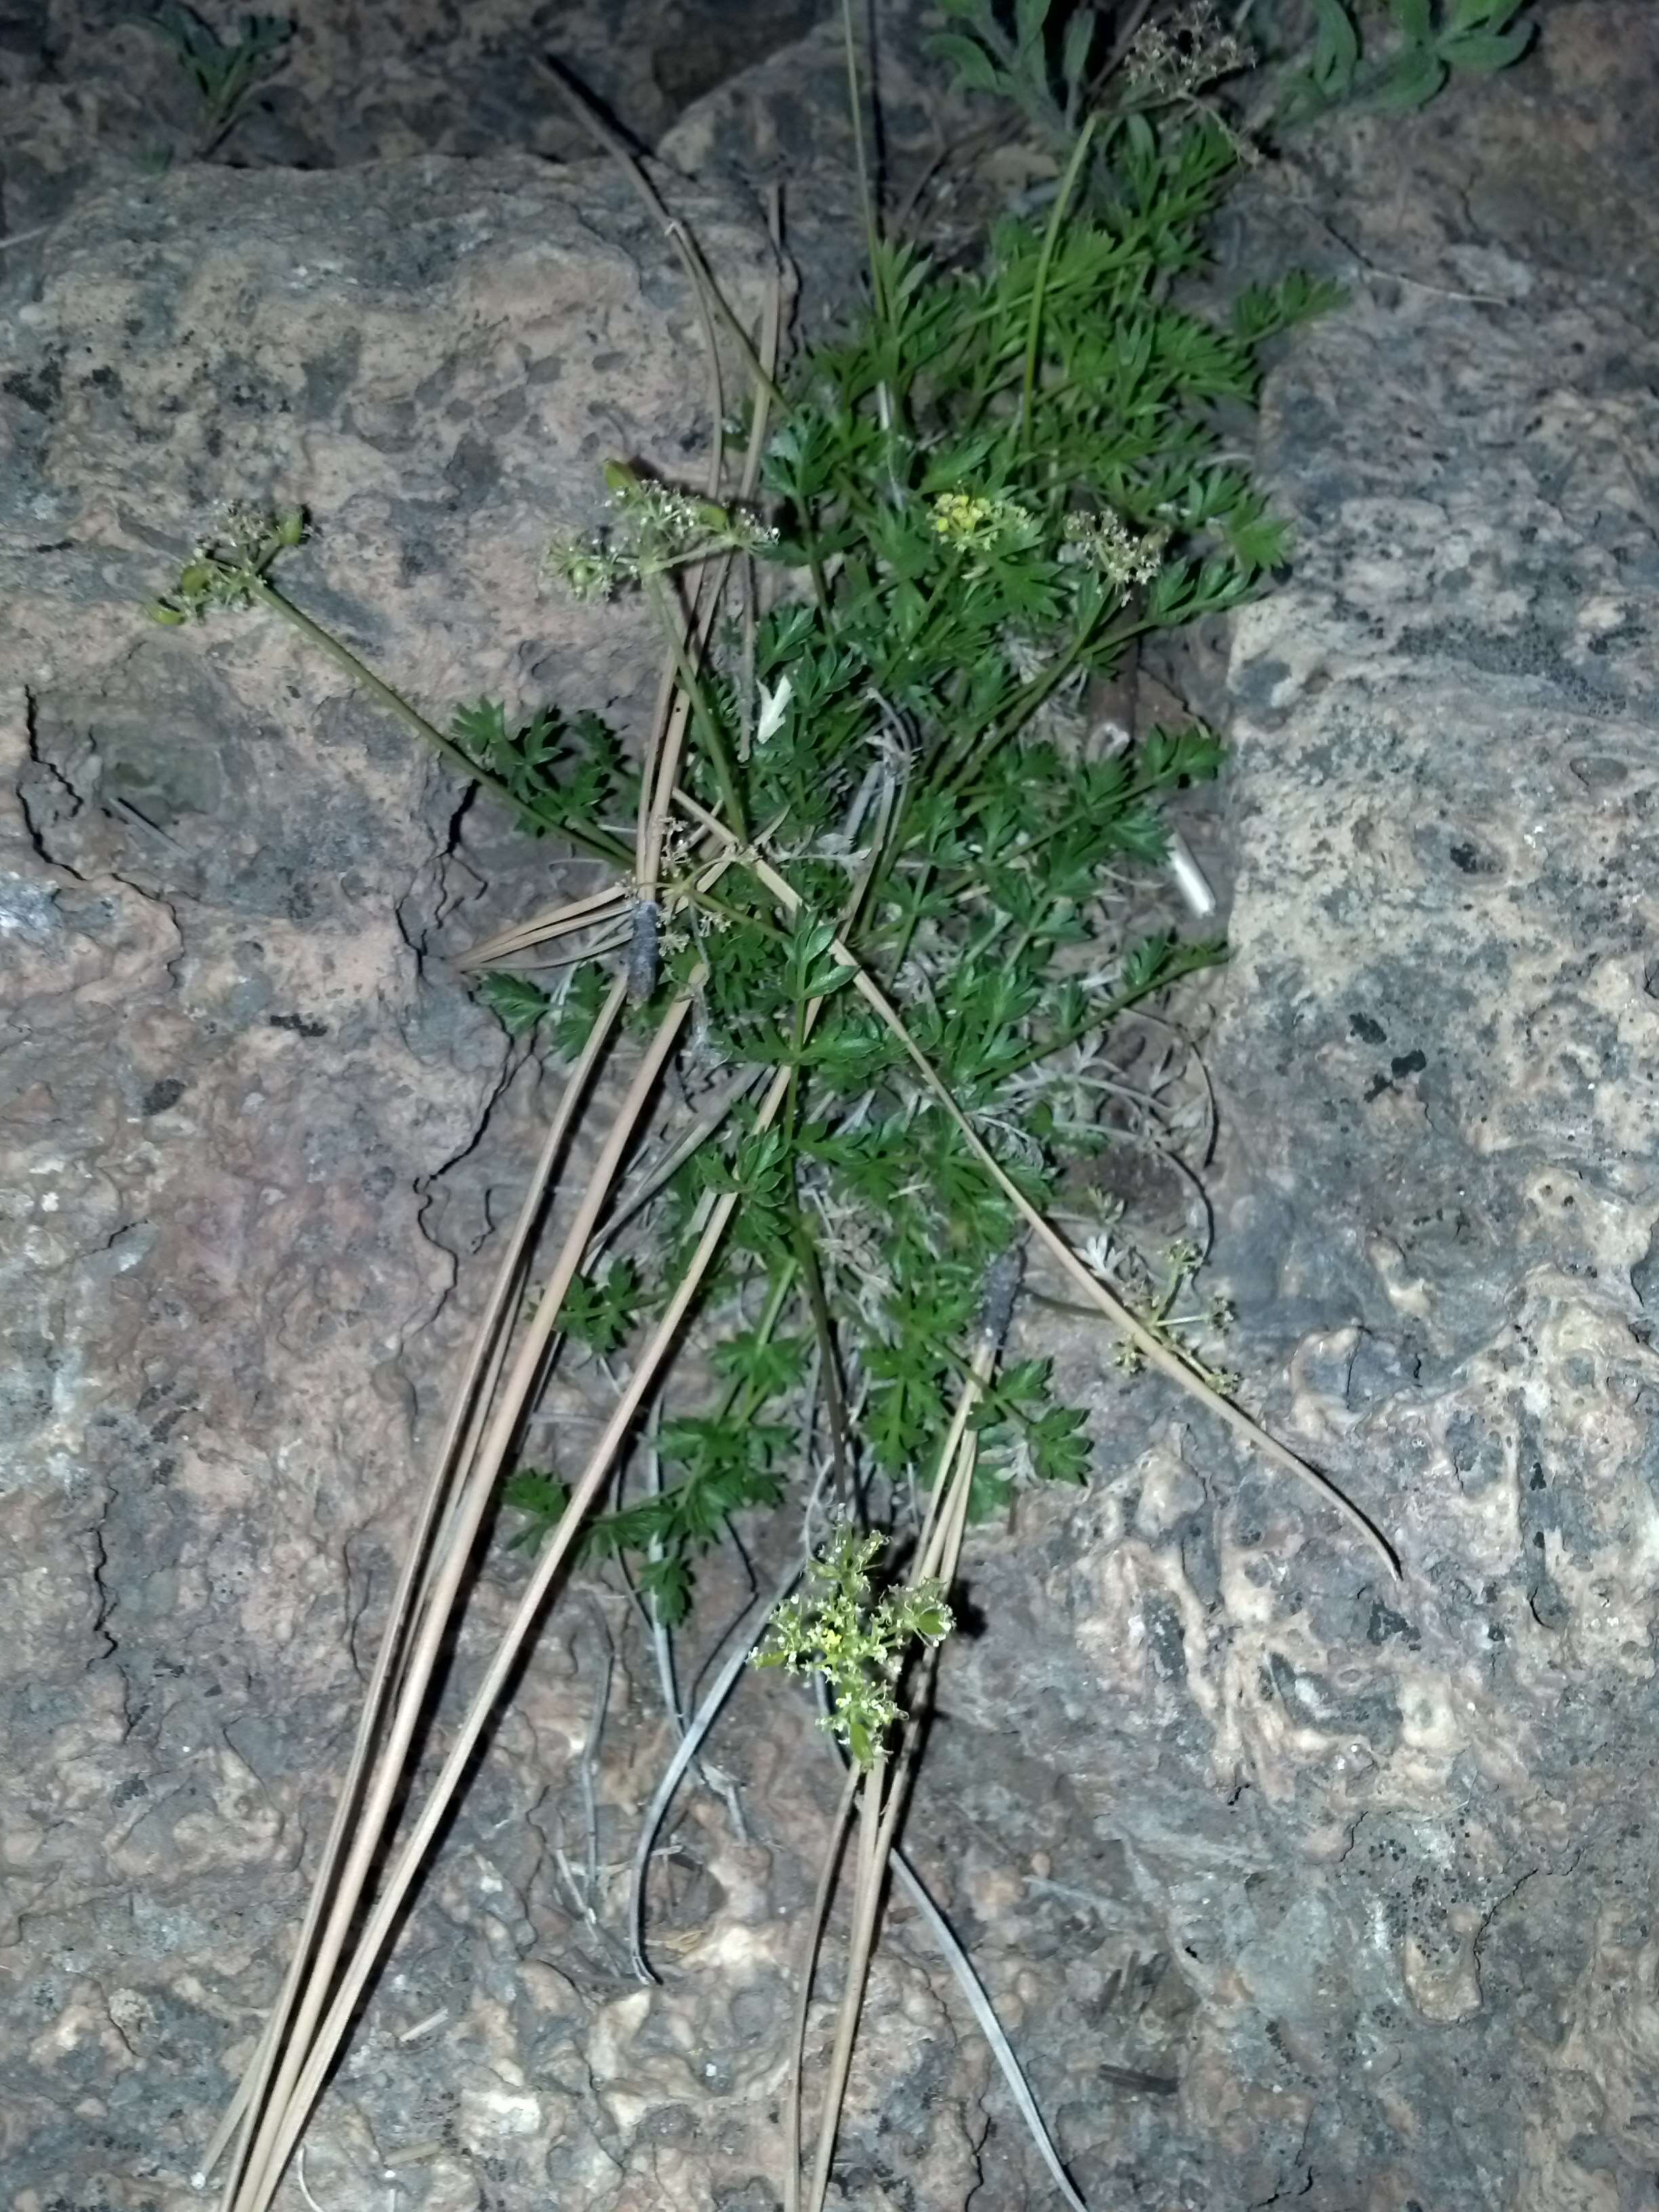 Image of Indian parsley